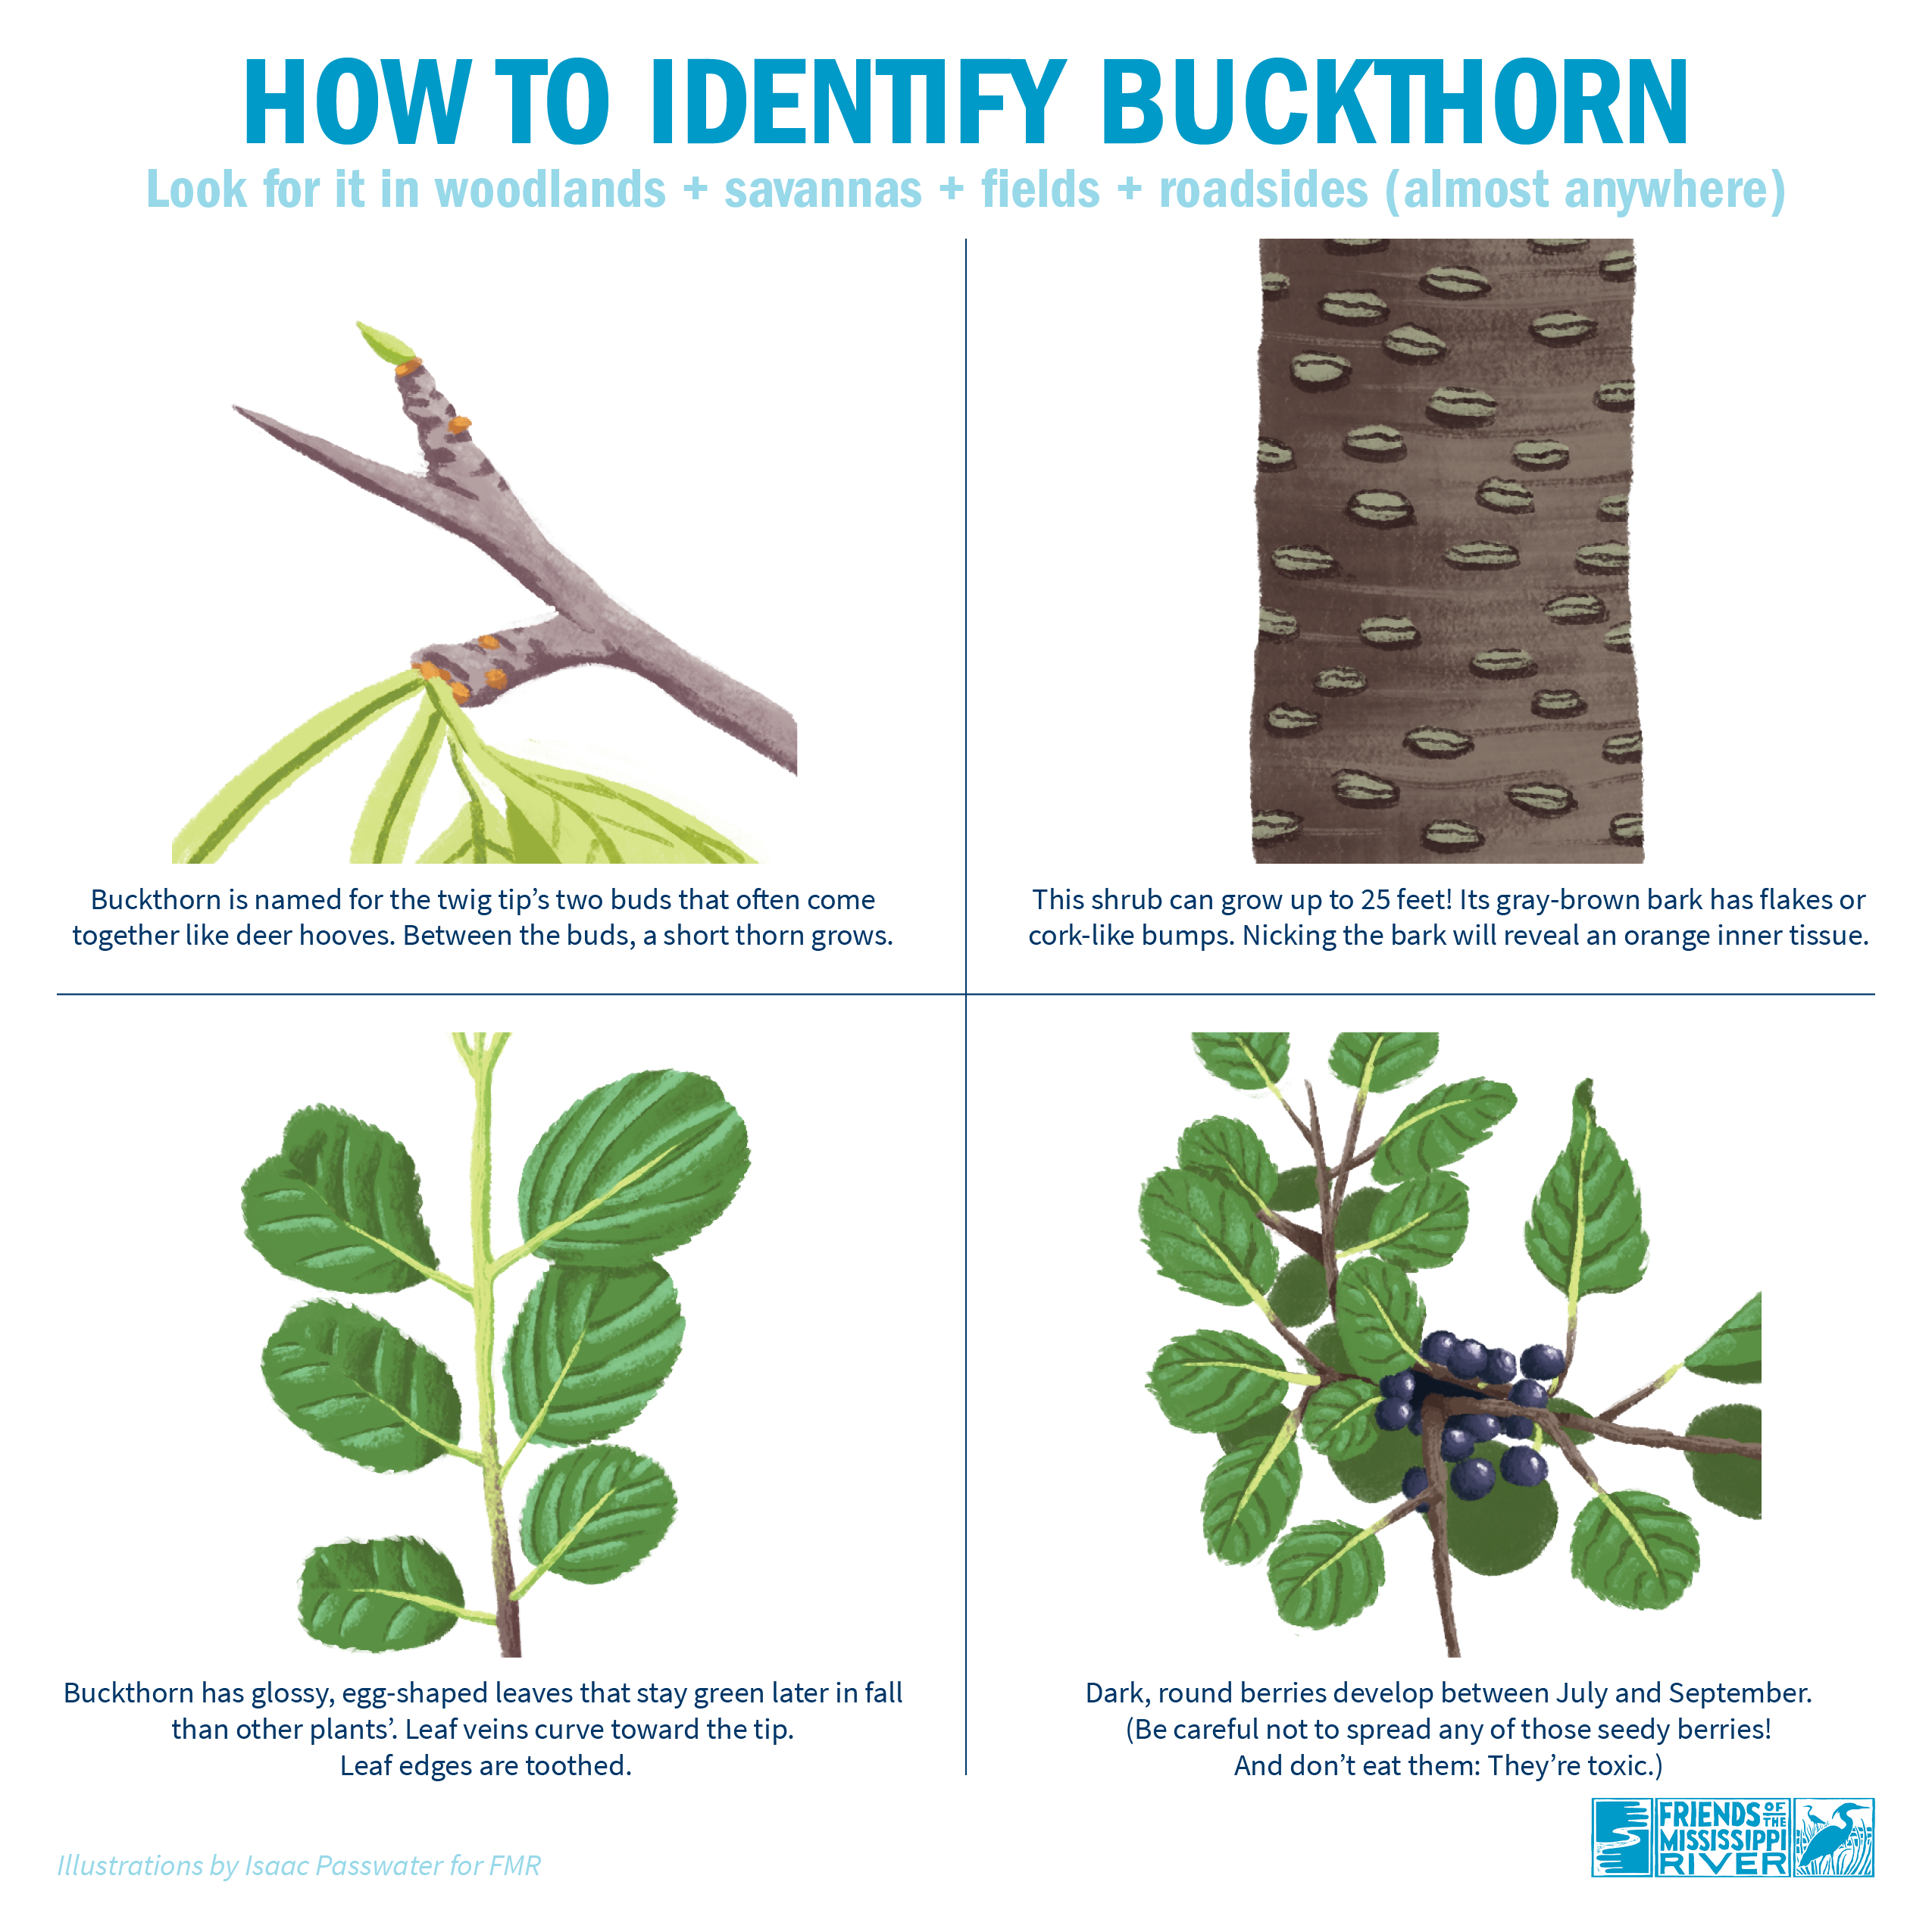 Shows illustrations with text: Buckthorn is named for the twig tip’s two buds that often come together like deer hooves. Between the buds, a short thorn grows. This shrub can grow up to 25 feet! Its gray-brown bark has flakes or cork-like bumps. Nicking the bark will reveal an orange inner tissue. Buckthorn has glossy, egg-shaped leaves that stay green later in fall than other plants’. Leaf veins curve toward the tip  Leaf edges are toothed. Dark, round berries develop between July and September. (Be carefu